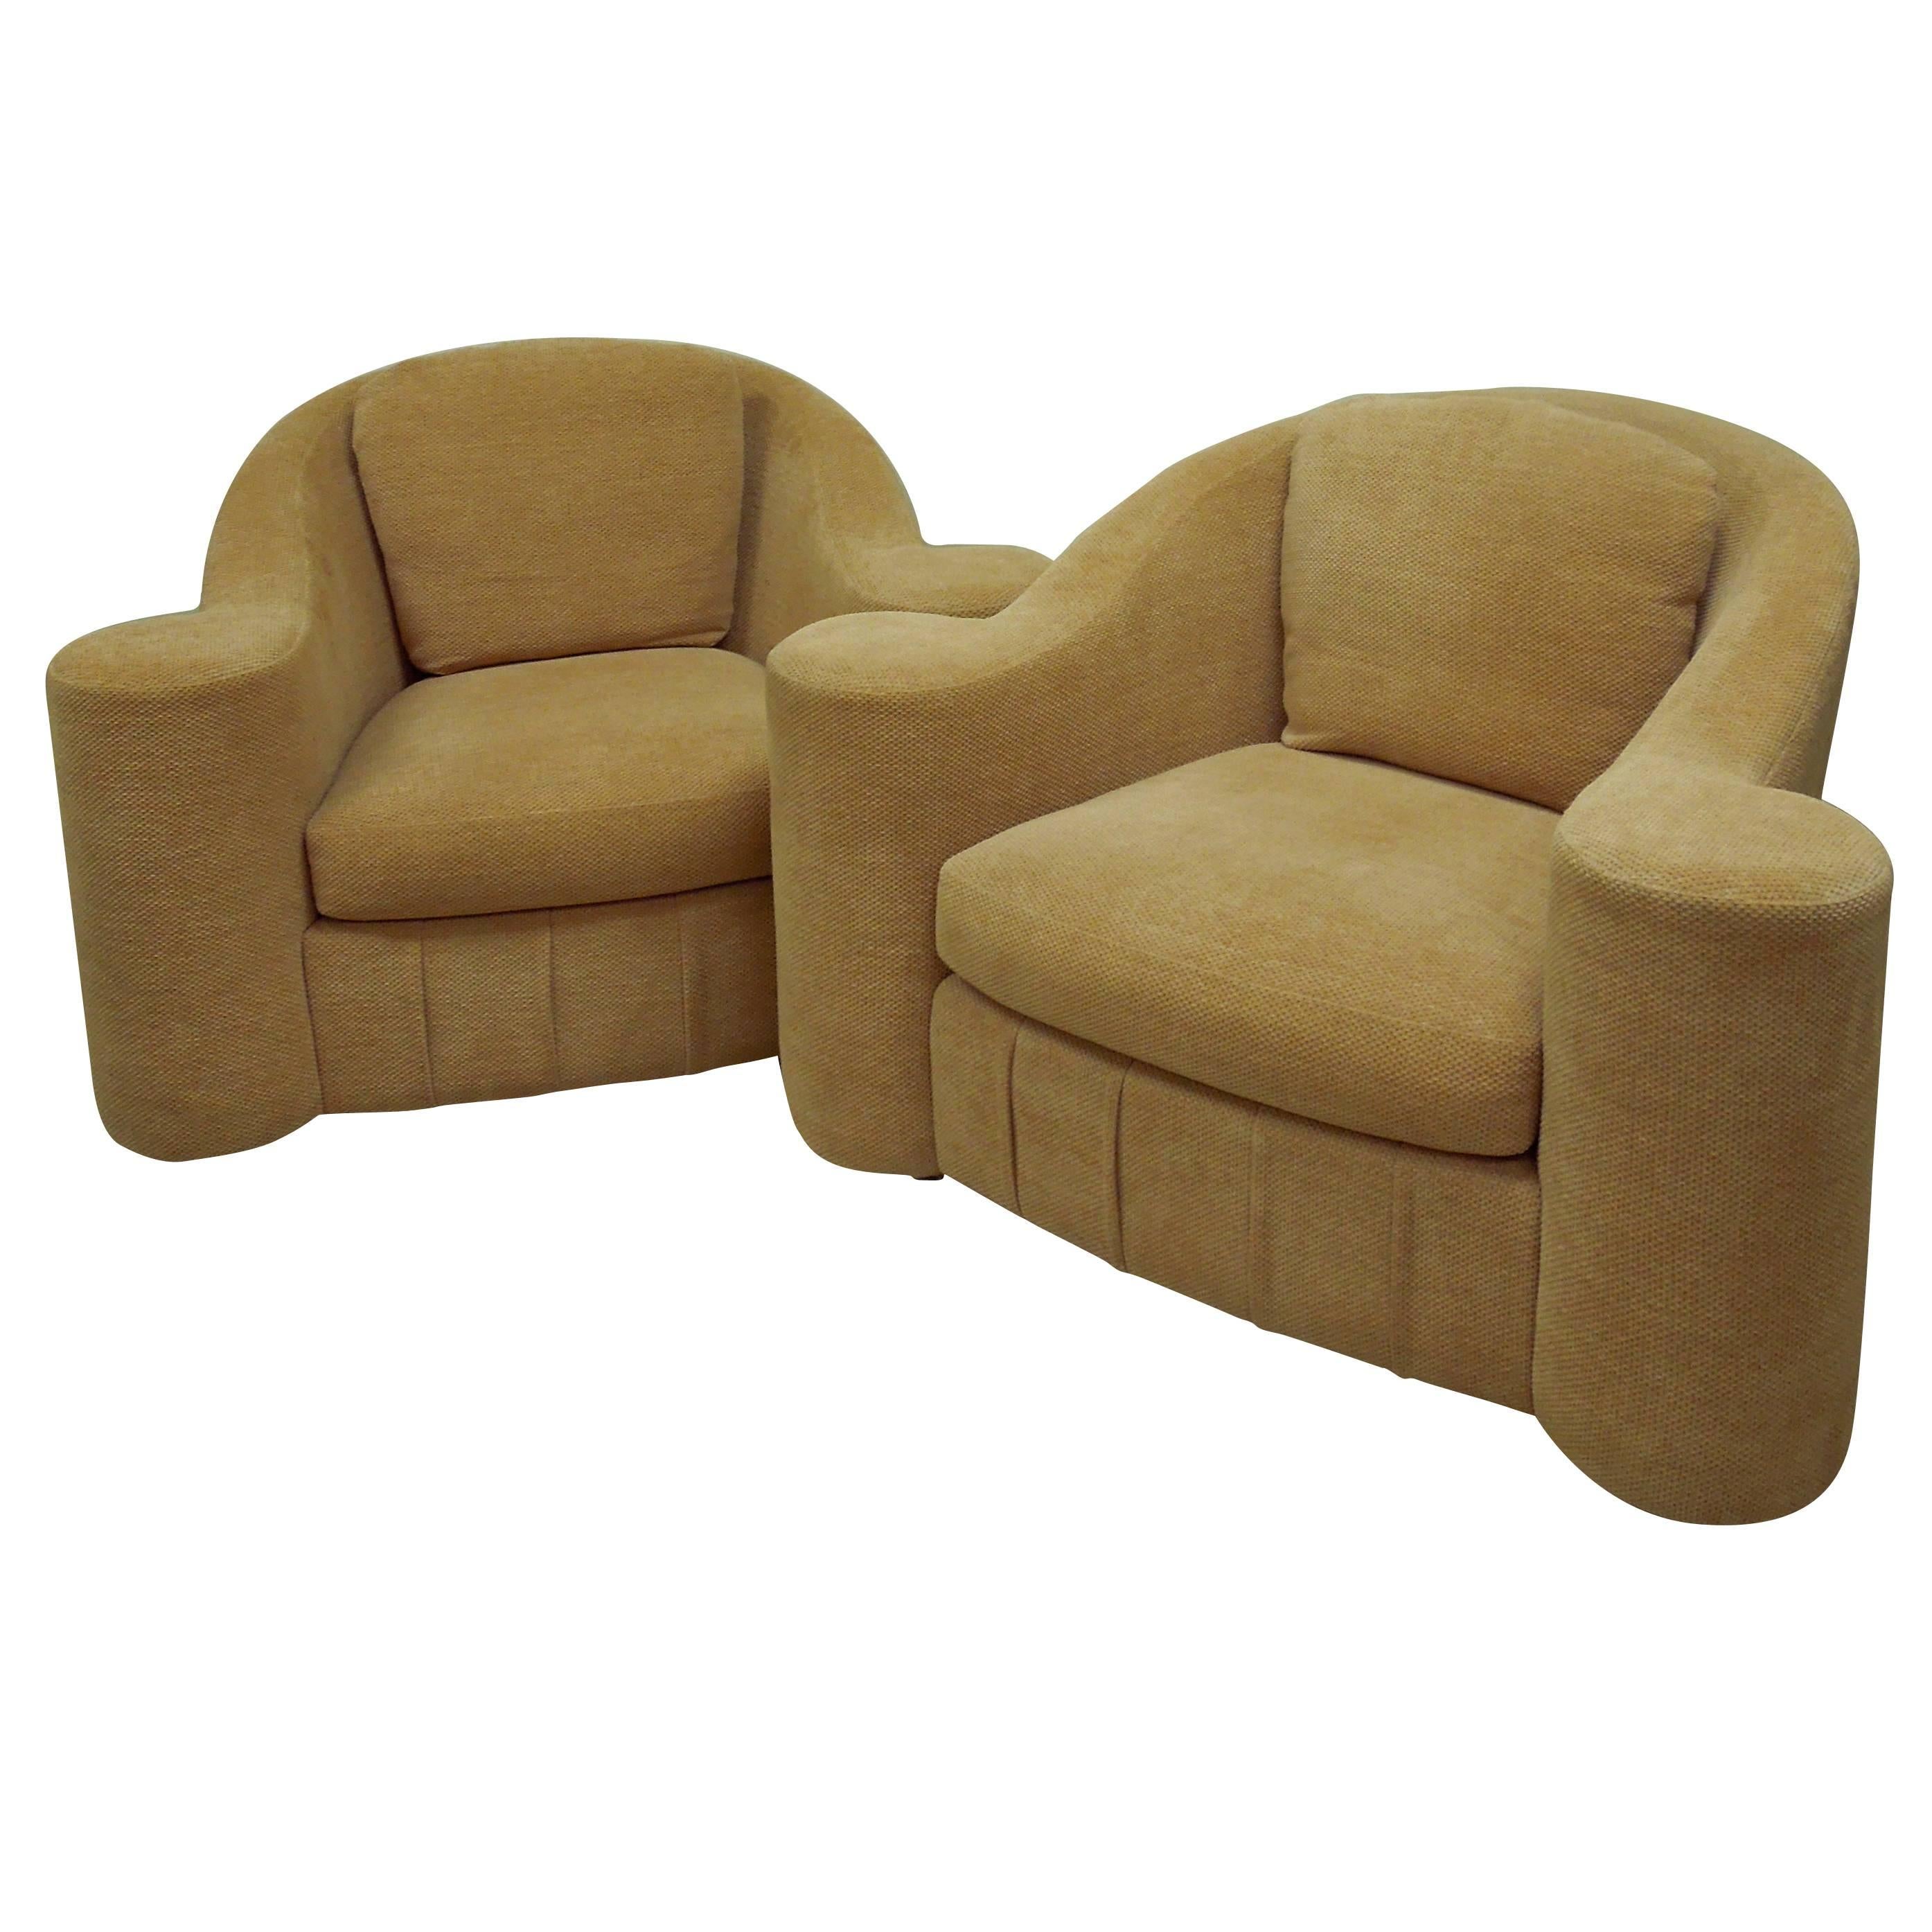 Large Pair of 1990s Modern Swivel Chairs from a Steve Chase Estate